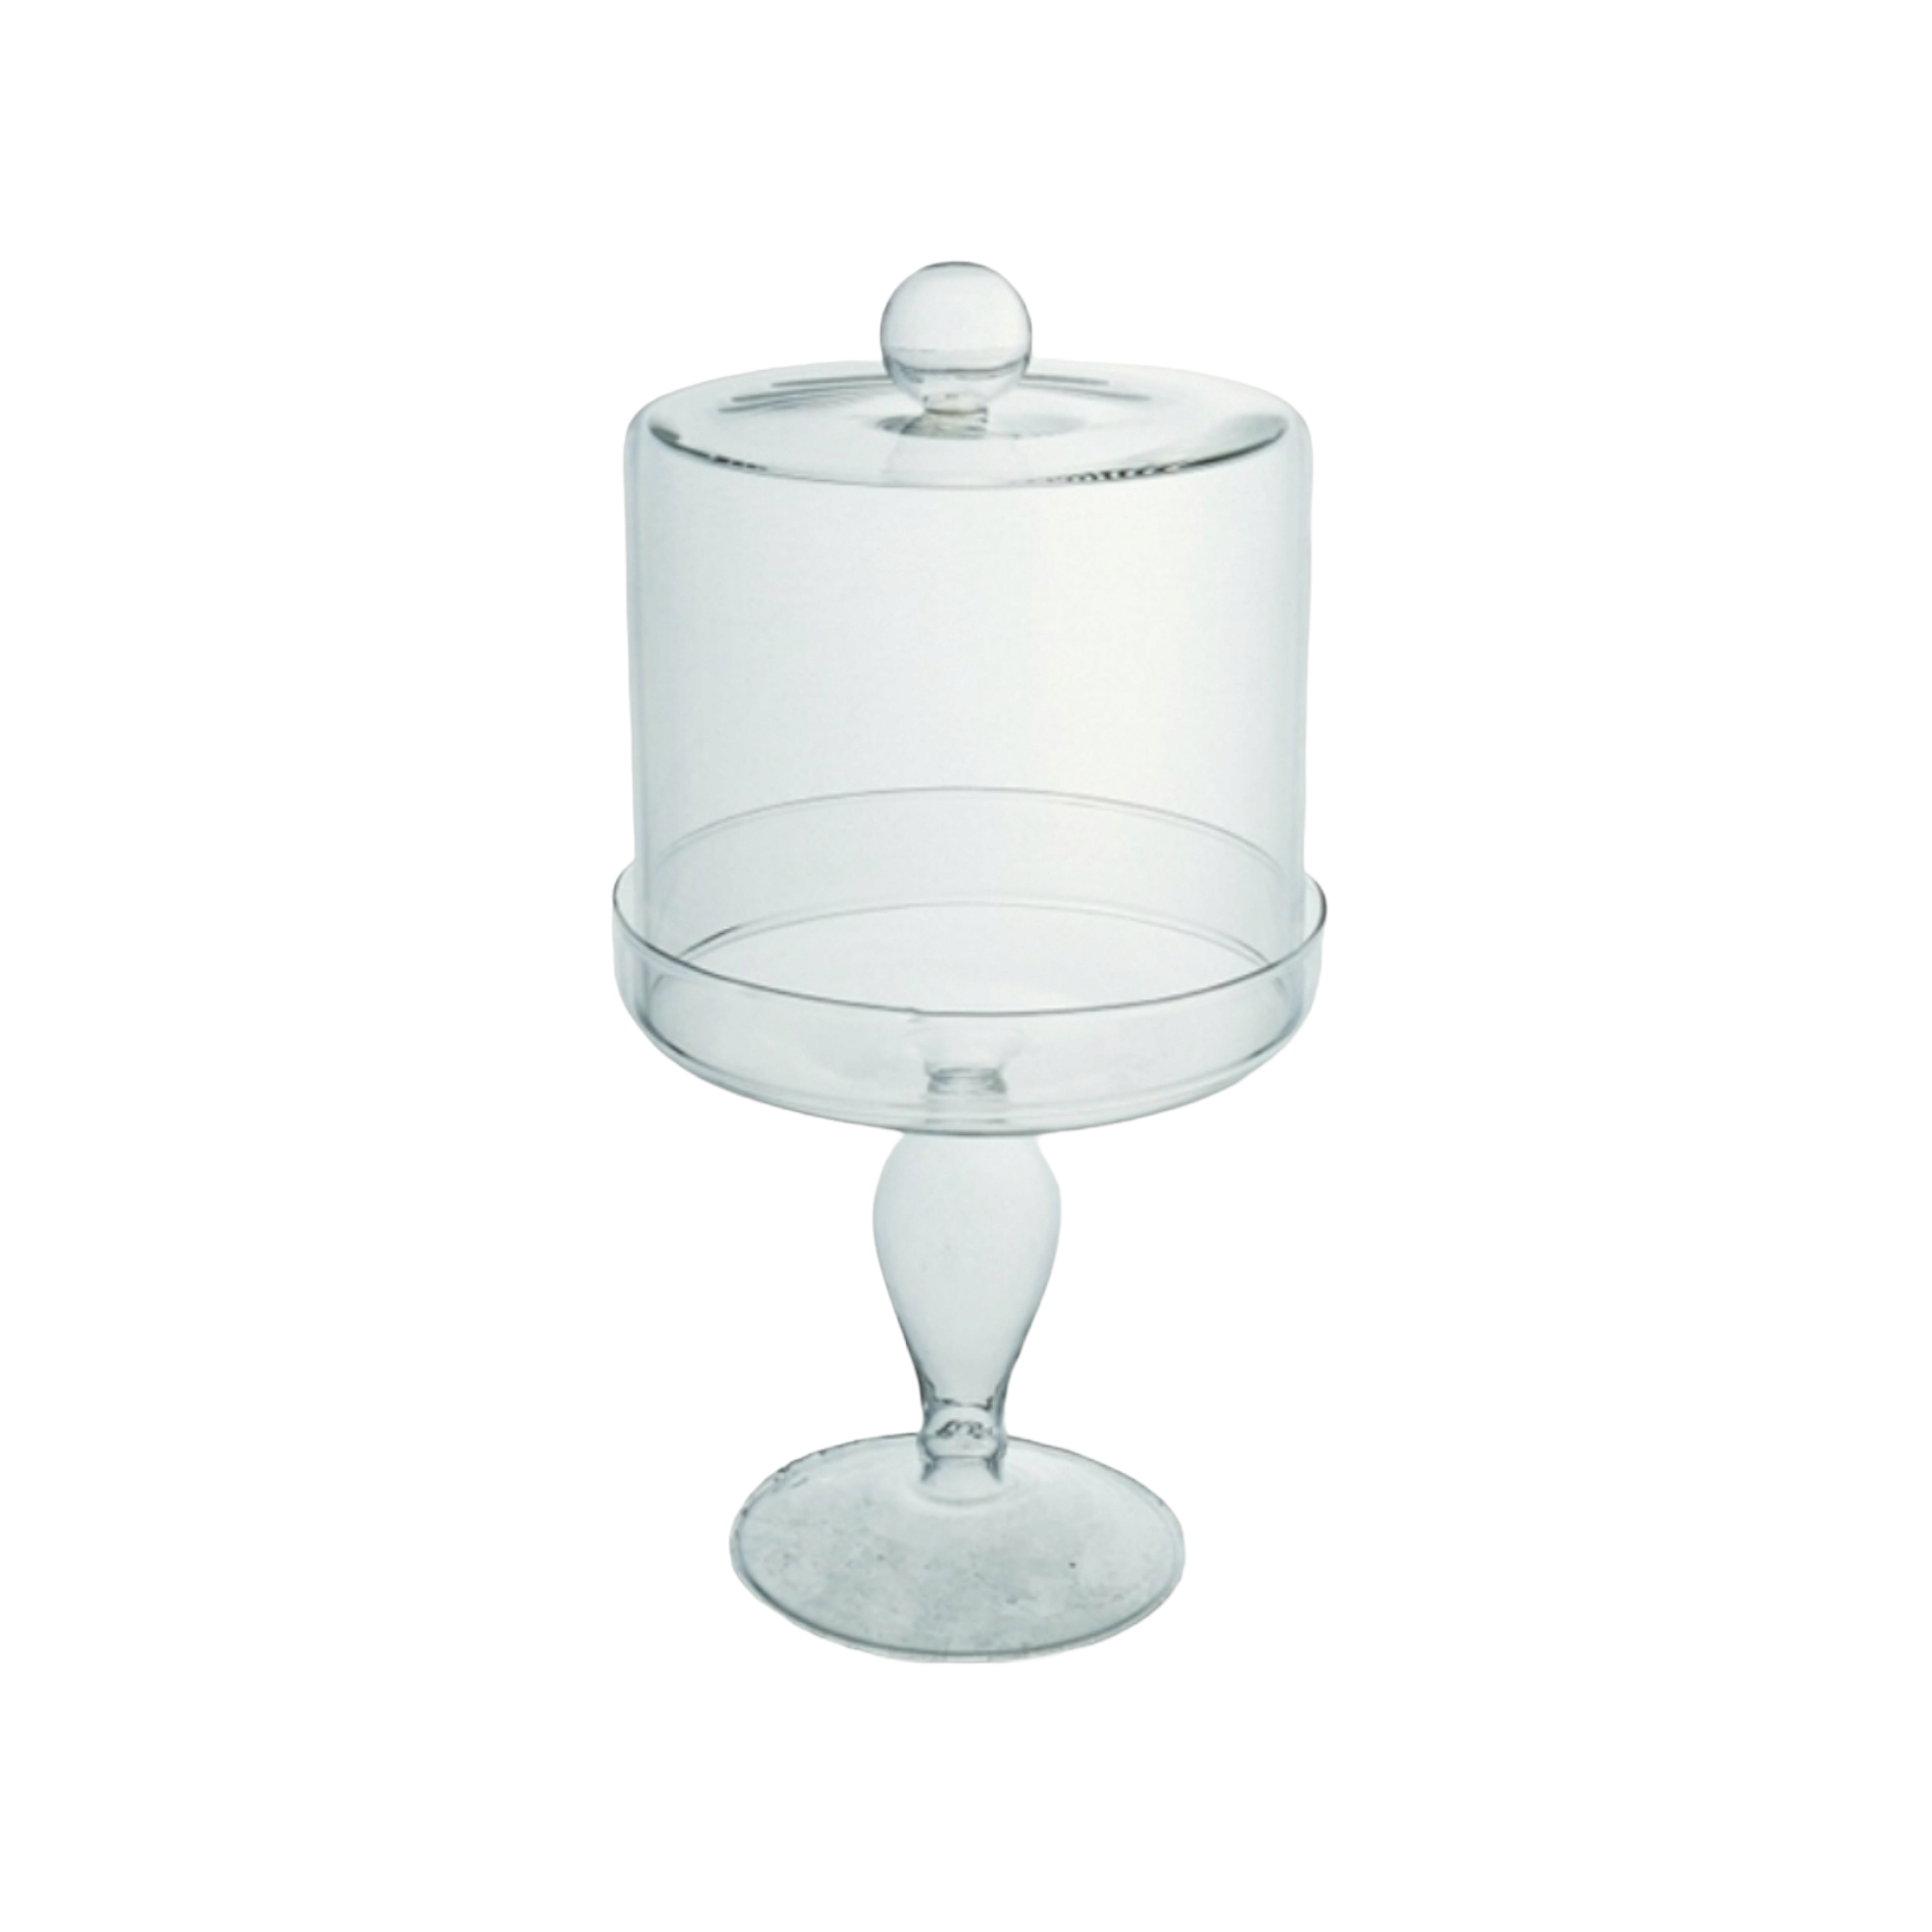 Pasabahce Patisserie Cupcake Serving Stand with Glass Dome Lid 12x32cm 34551